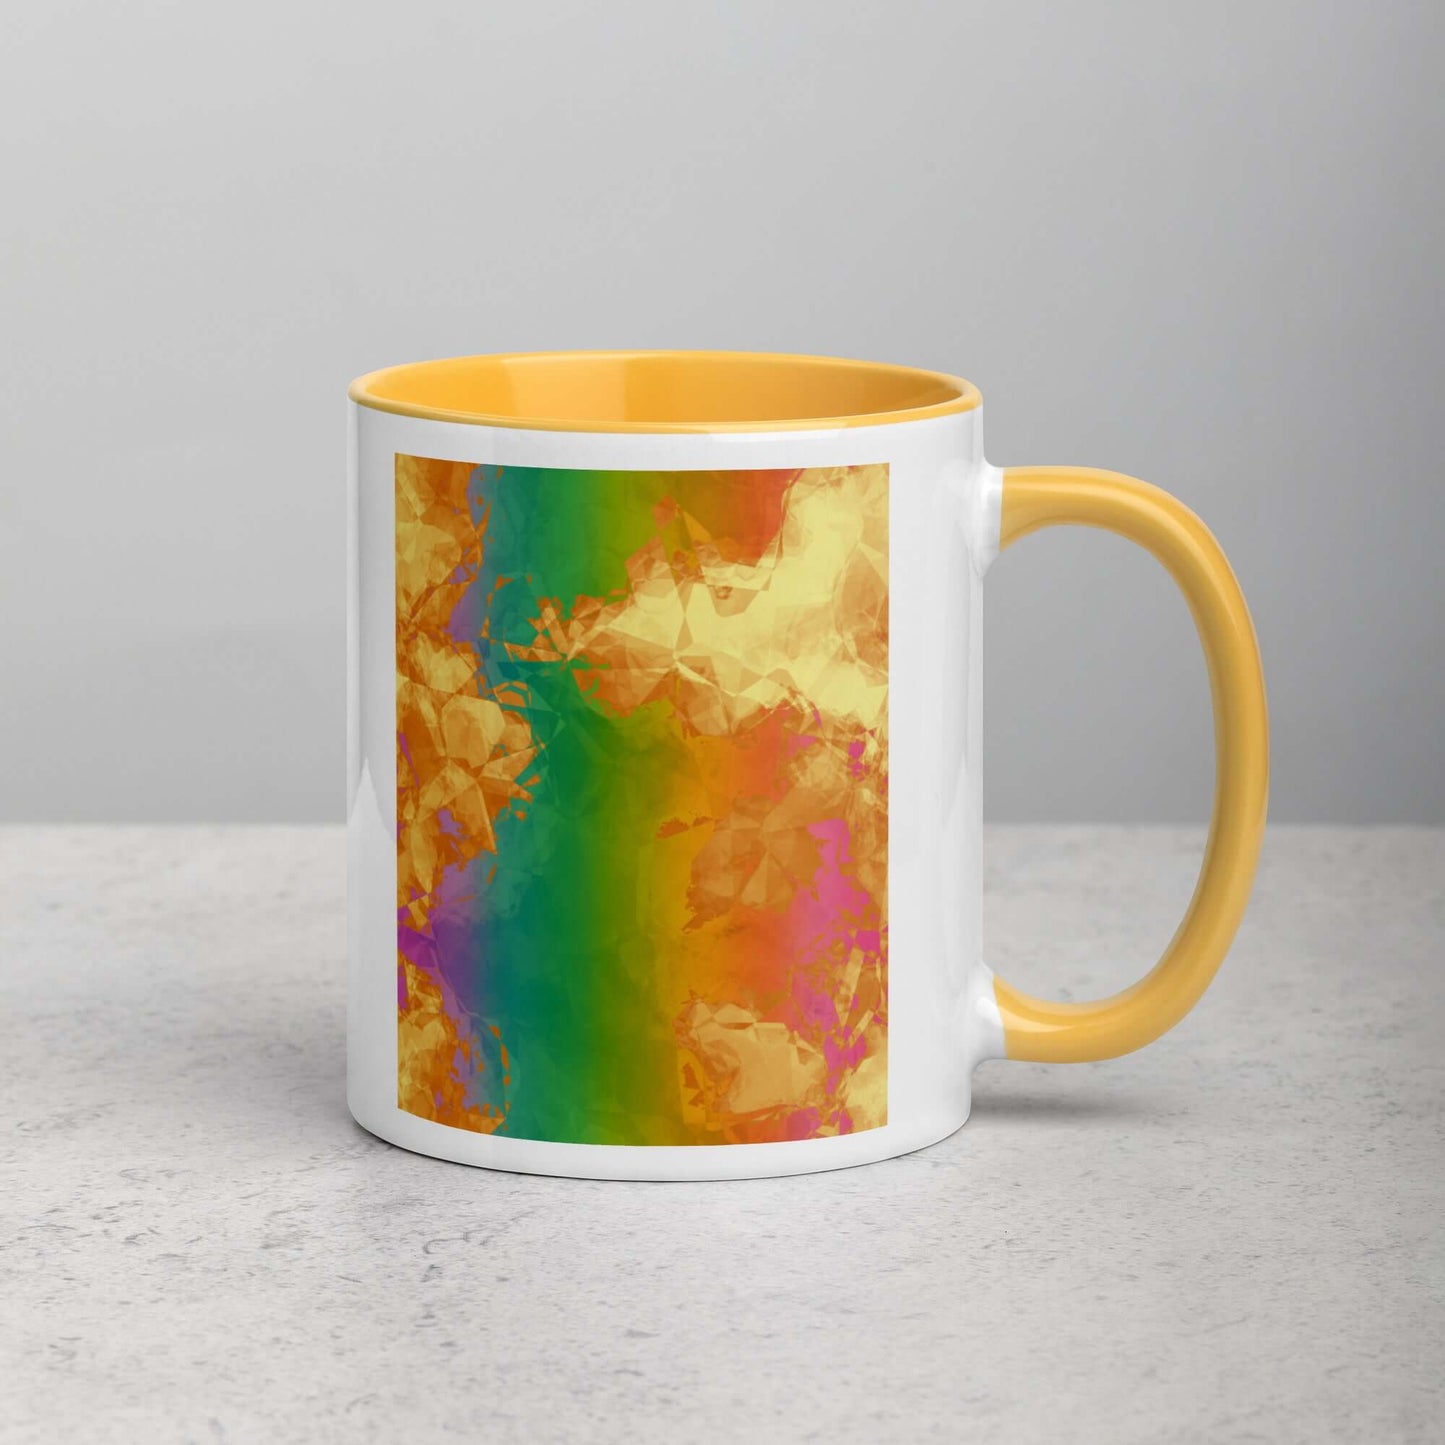 Fiery Rainbow “Rainbow Geode” Abstract Art Mug with Golden Yellow Color Inside Right Handed Front View